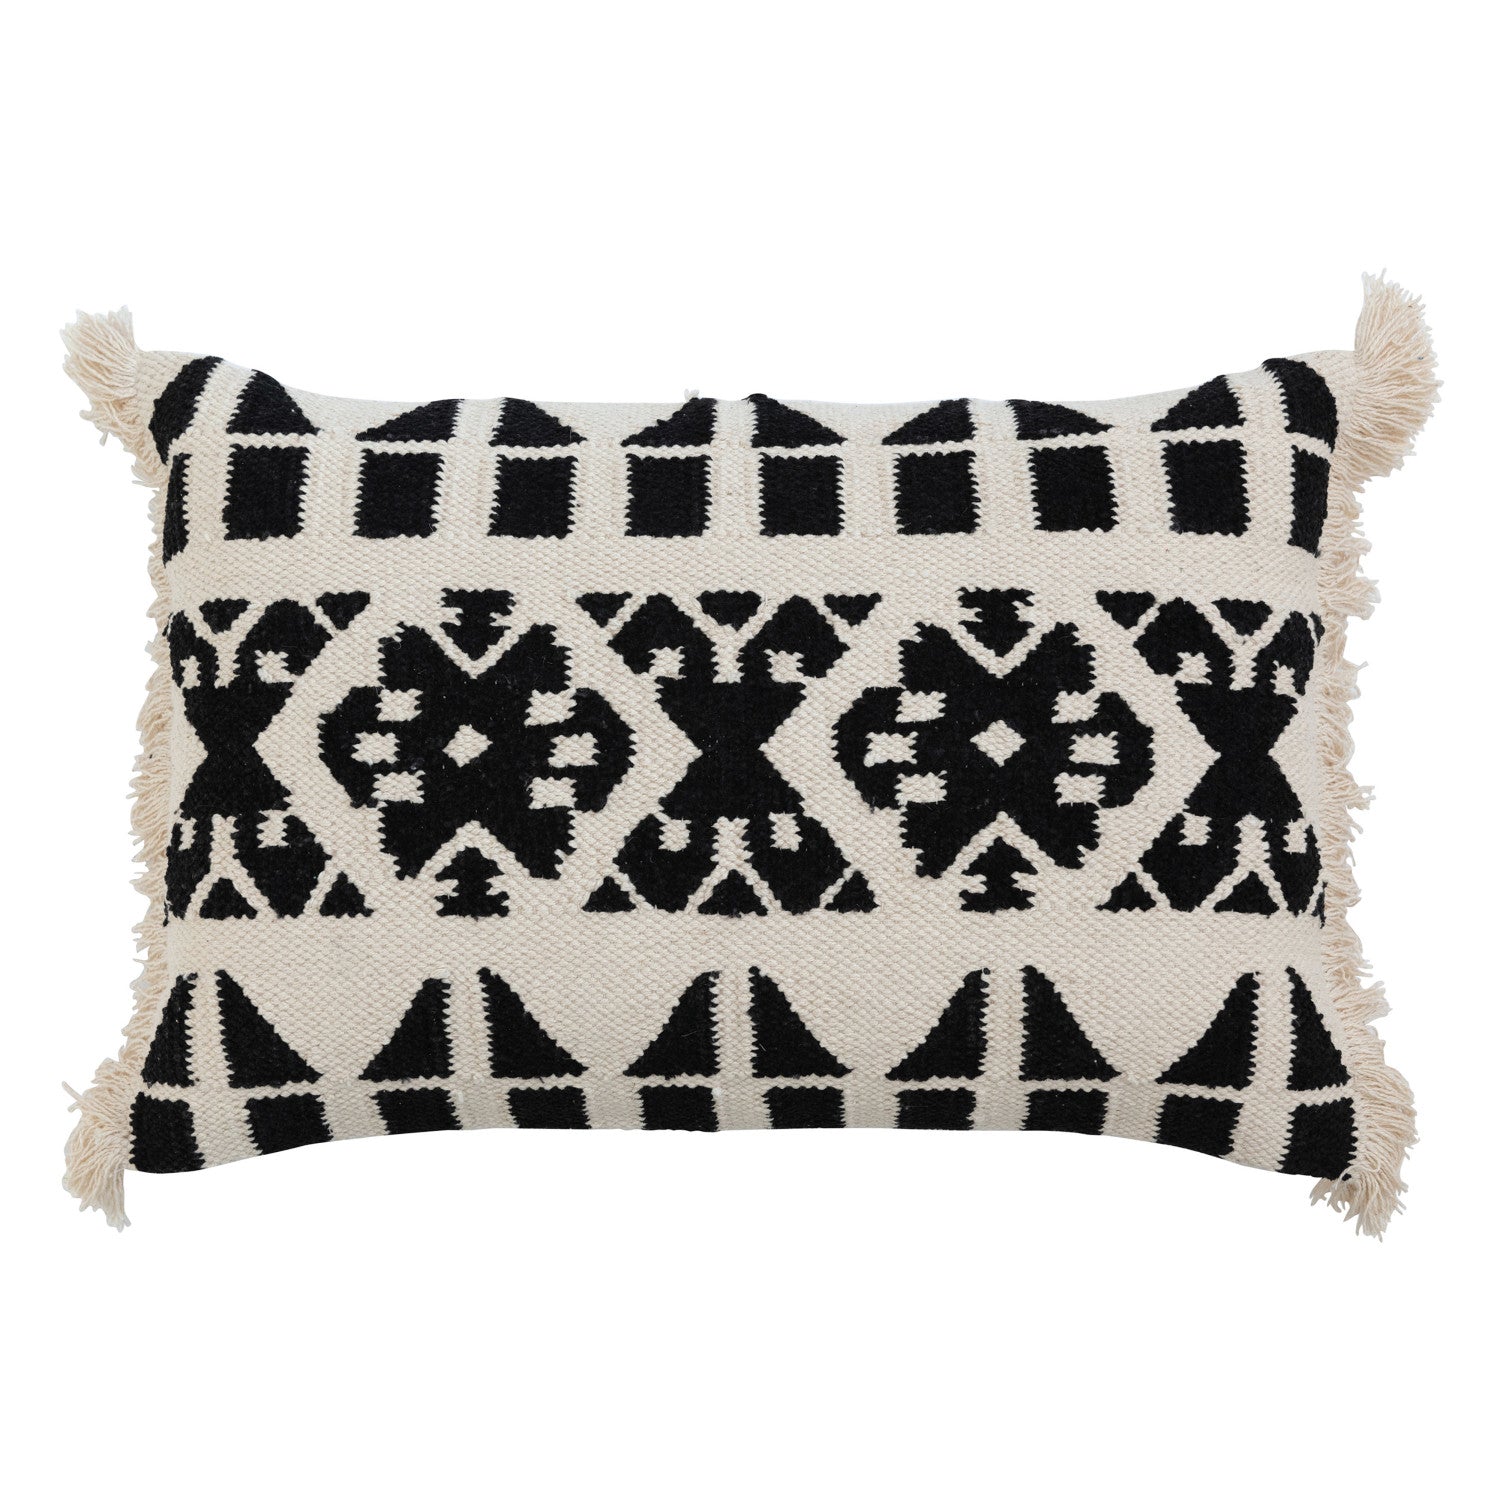 Hand Woven Kilim Pillow - Down Filled